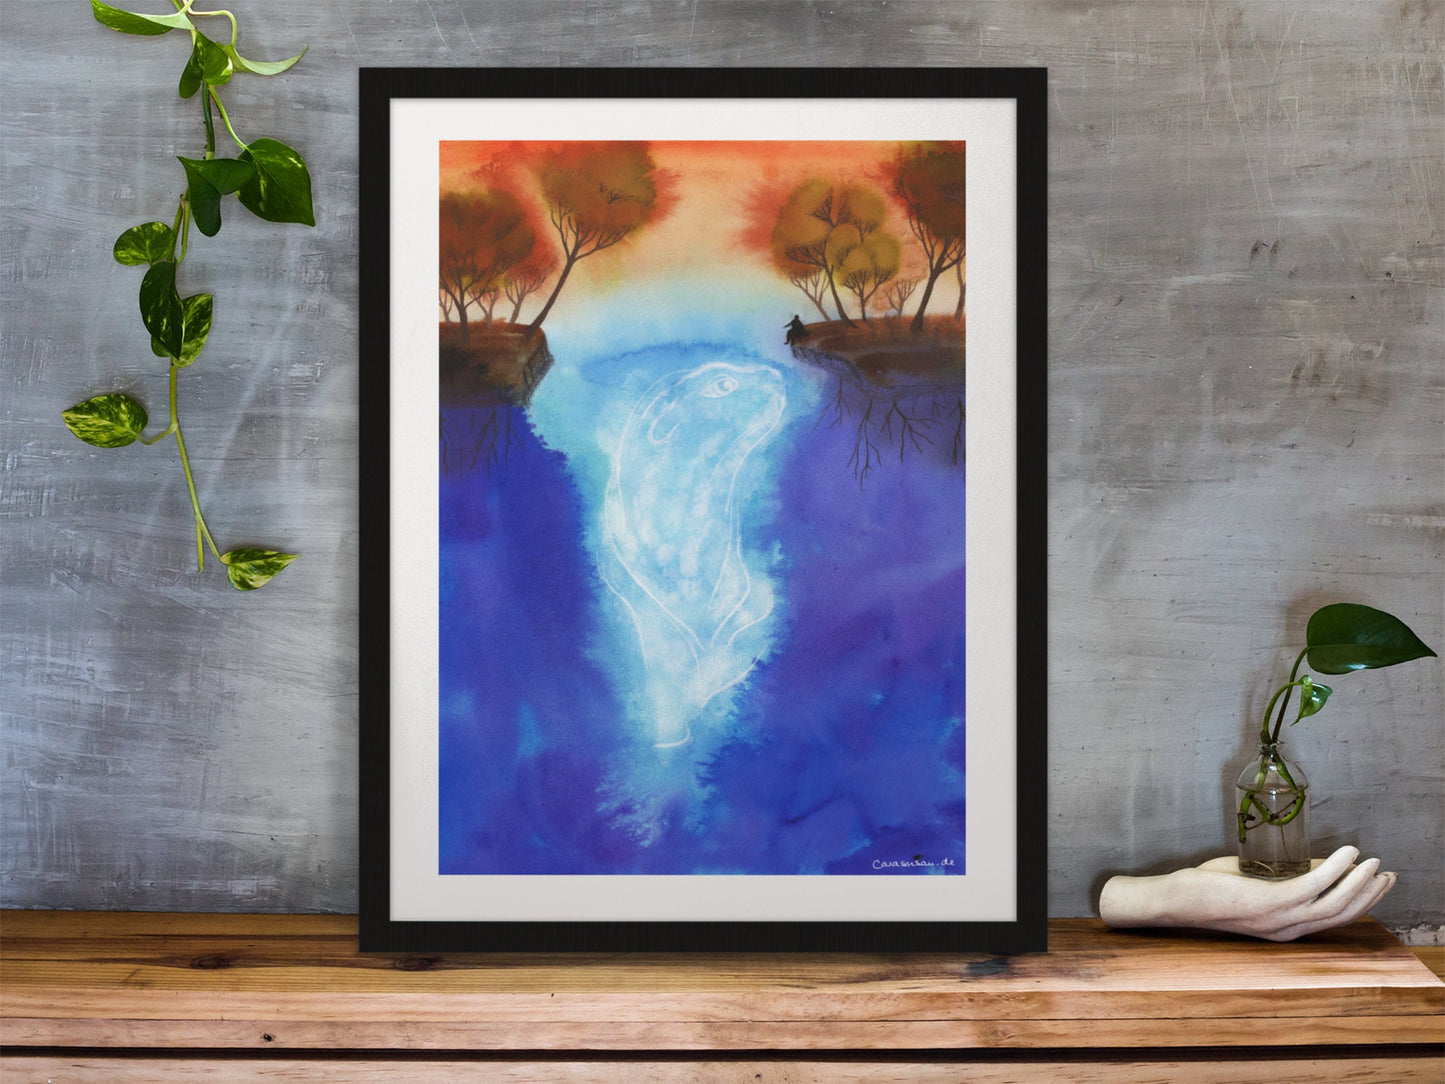 Watercolor 'Geist aus der Tiefen' art print on fine watercolor paper 25x34cm - hand-signed and limited